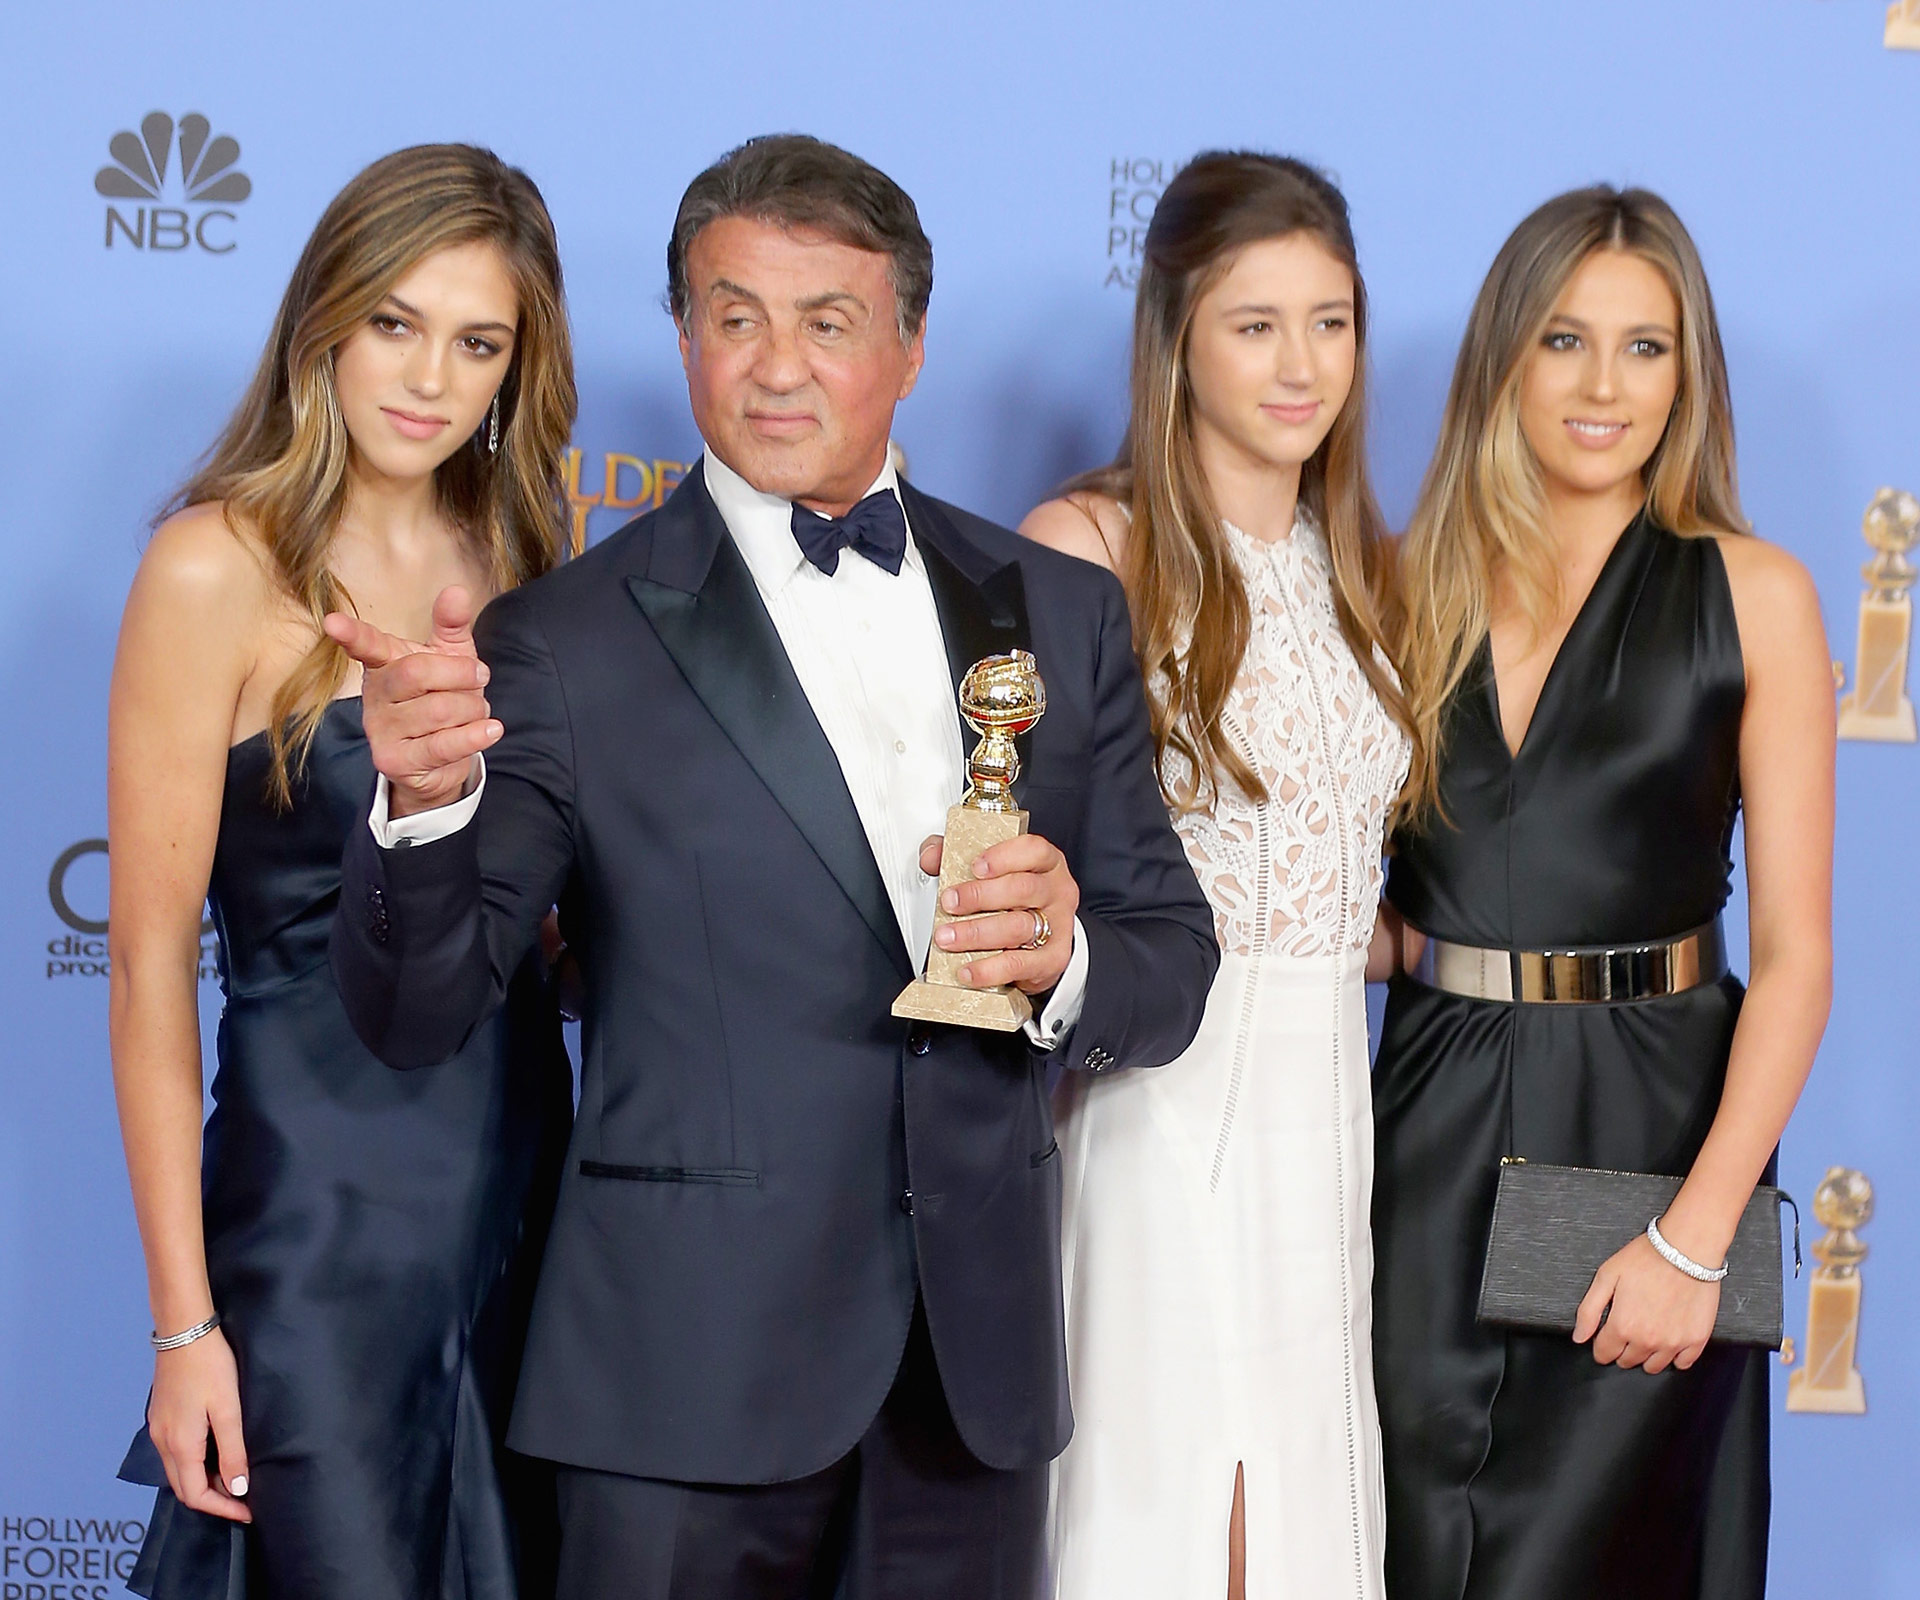 Sylvester Stallone’s daughters to become Miss Golden Globes for Sunday night’s awards show